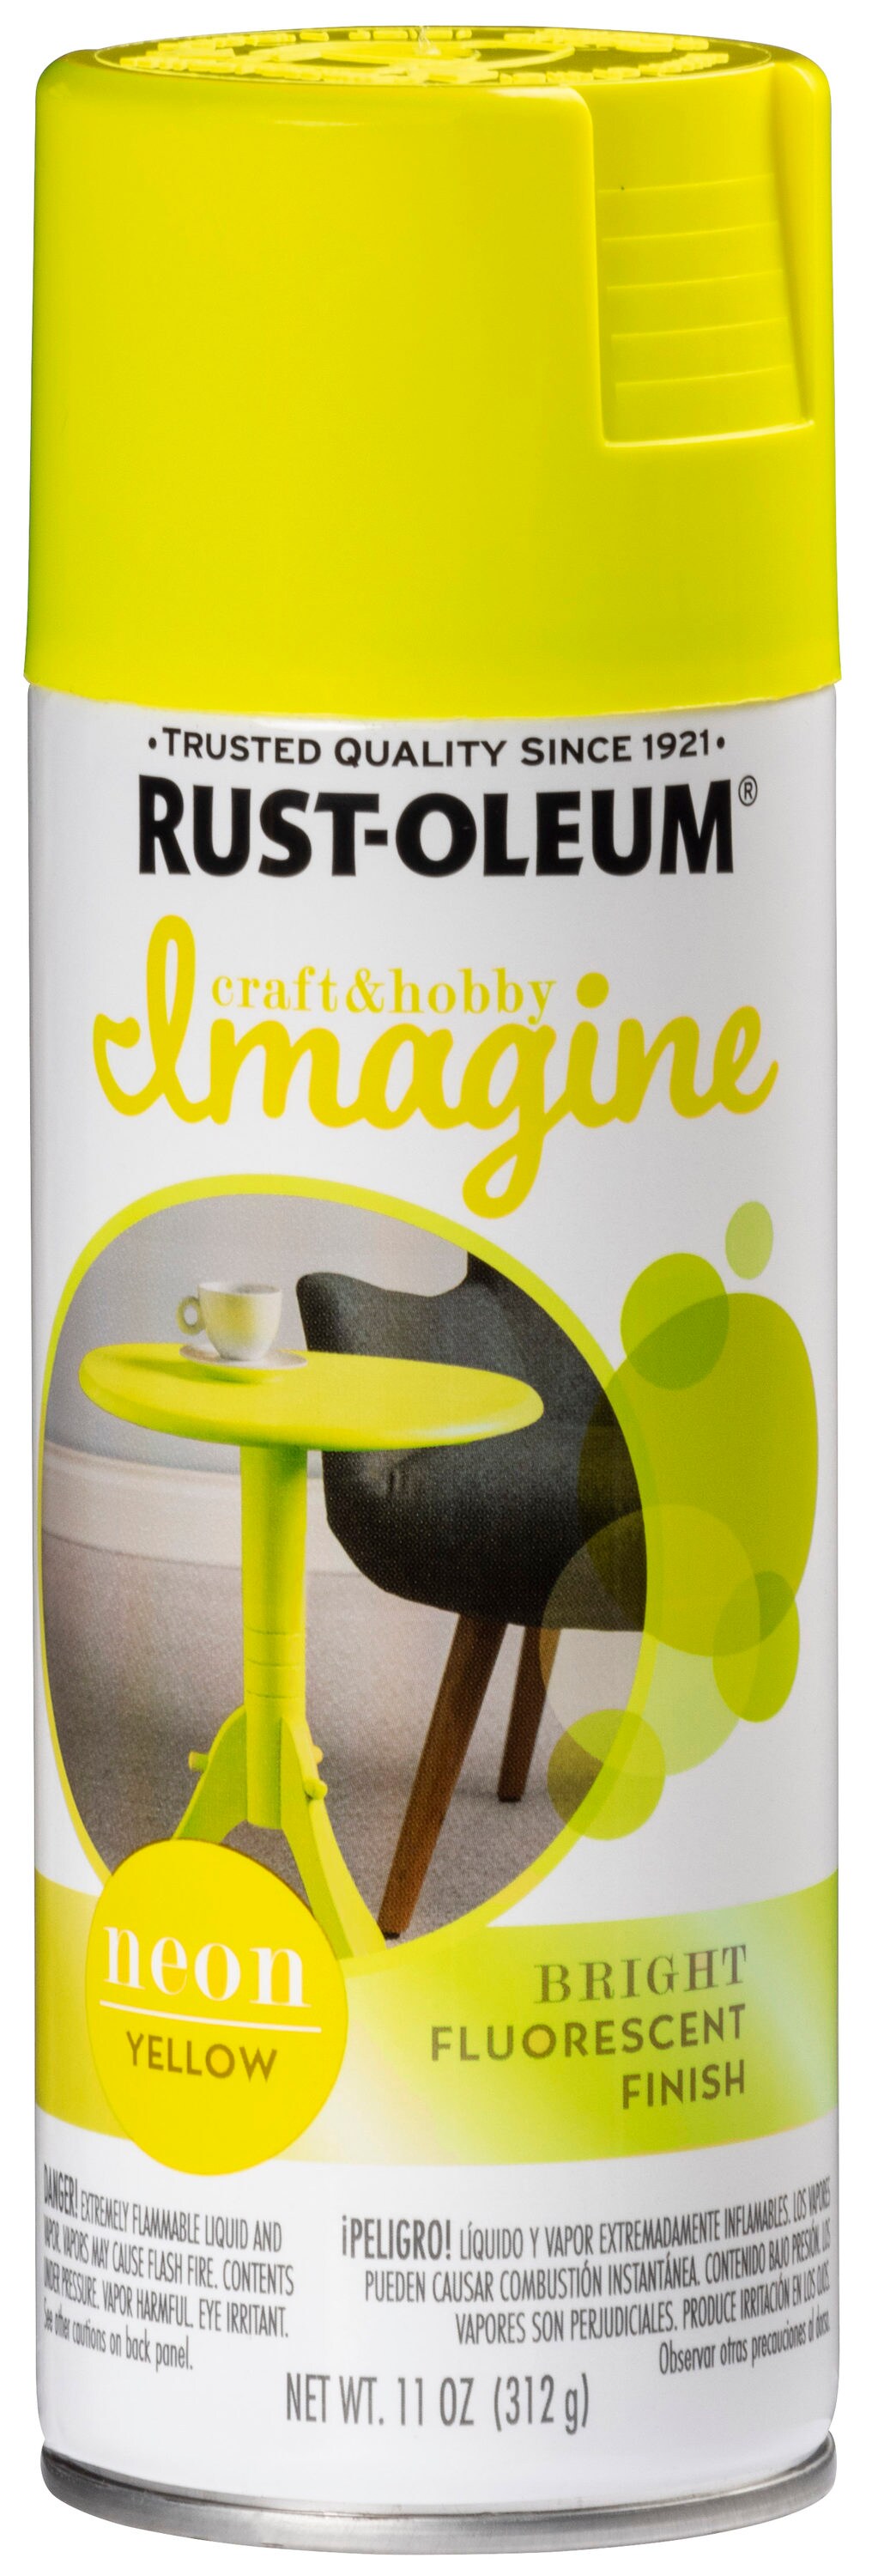 Rust-Oleum Specialty 11 oz. Fluorescent Yellow Spray Paint (6-pack)